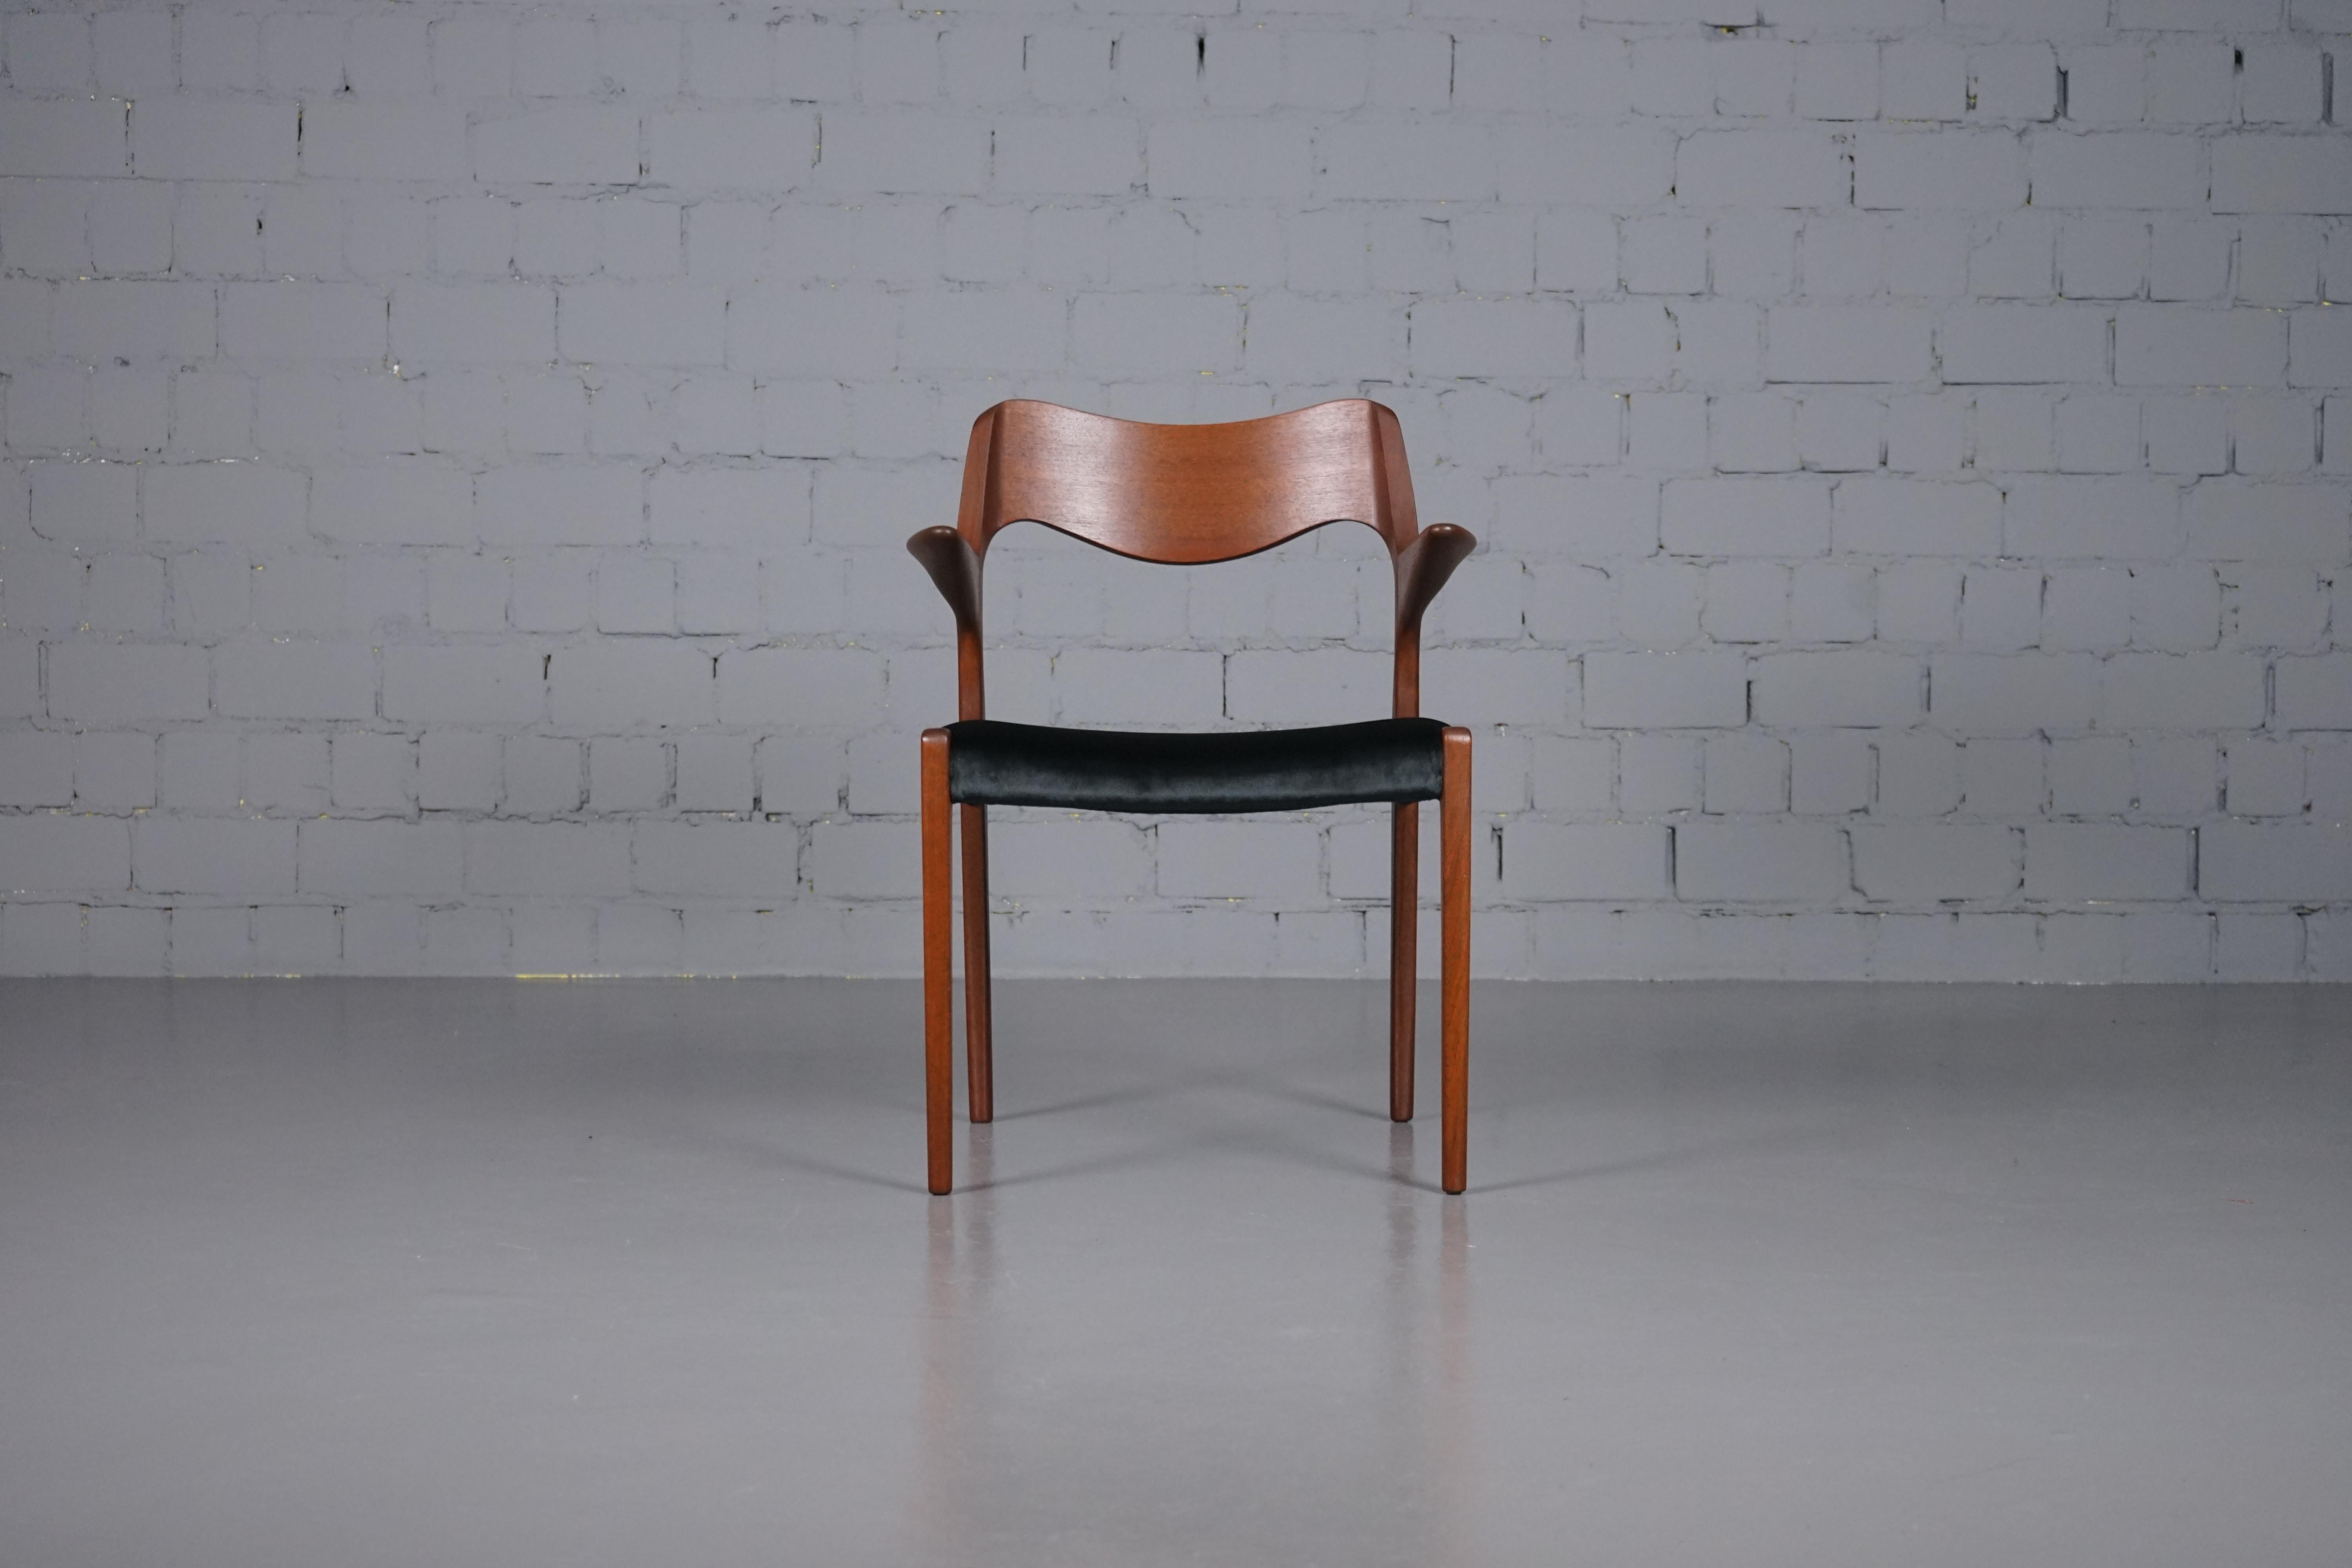 Teak chair Model No. 55 chair by Niels O. Moller for J.L Møller
The chair has been completely restored, belts, upholstery, and fabric are new. The substance is a deep black and high-quality velvet fabric by Dedar, Milano was chosen. The fabric of